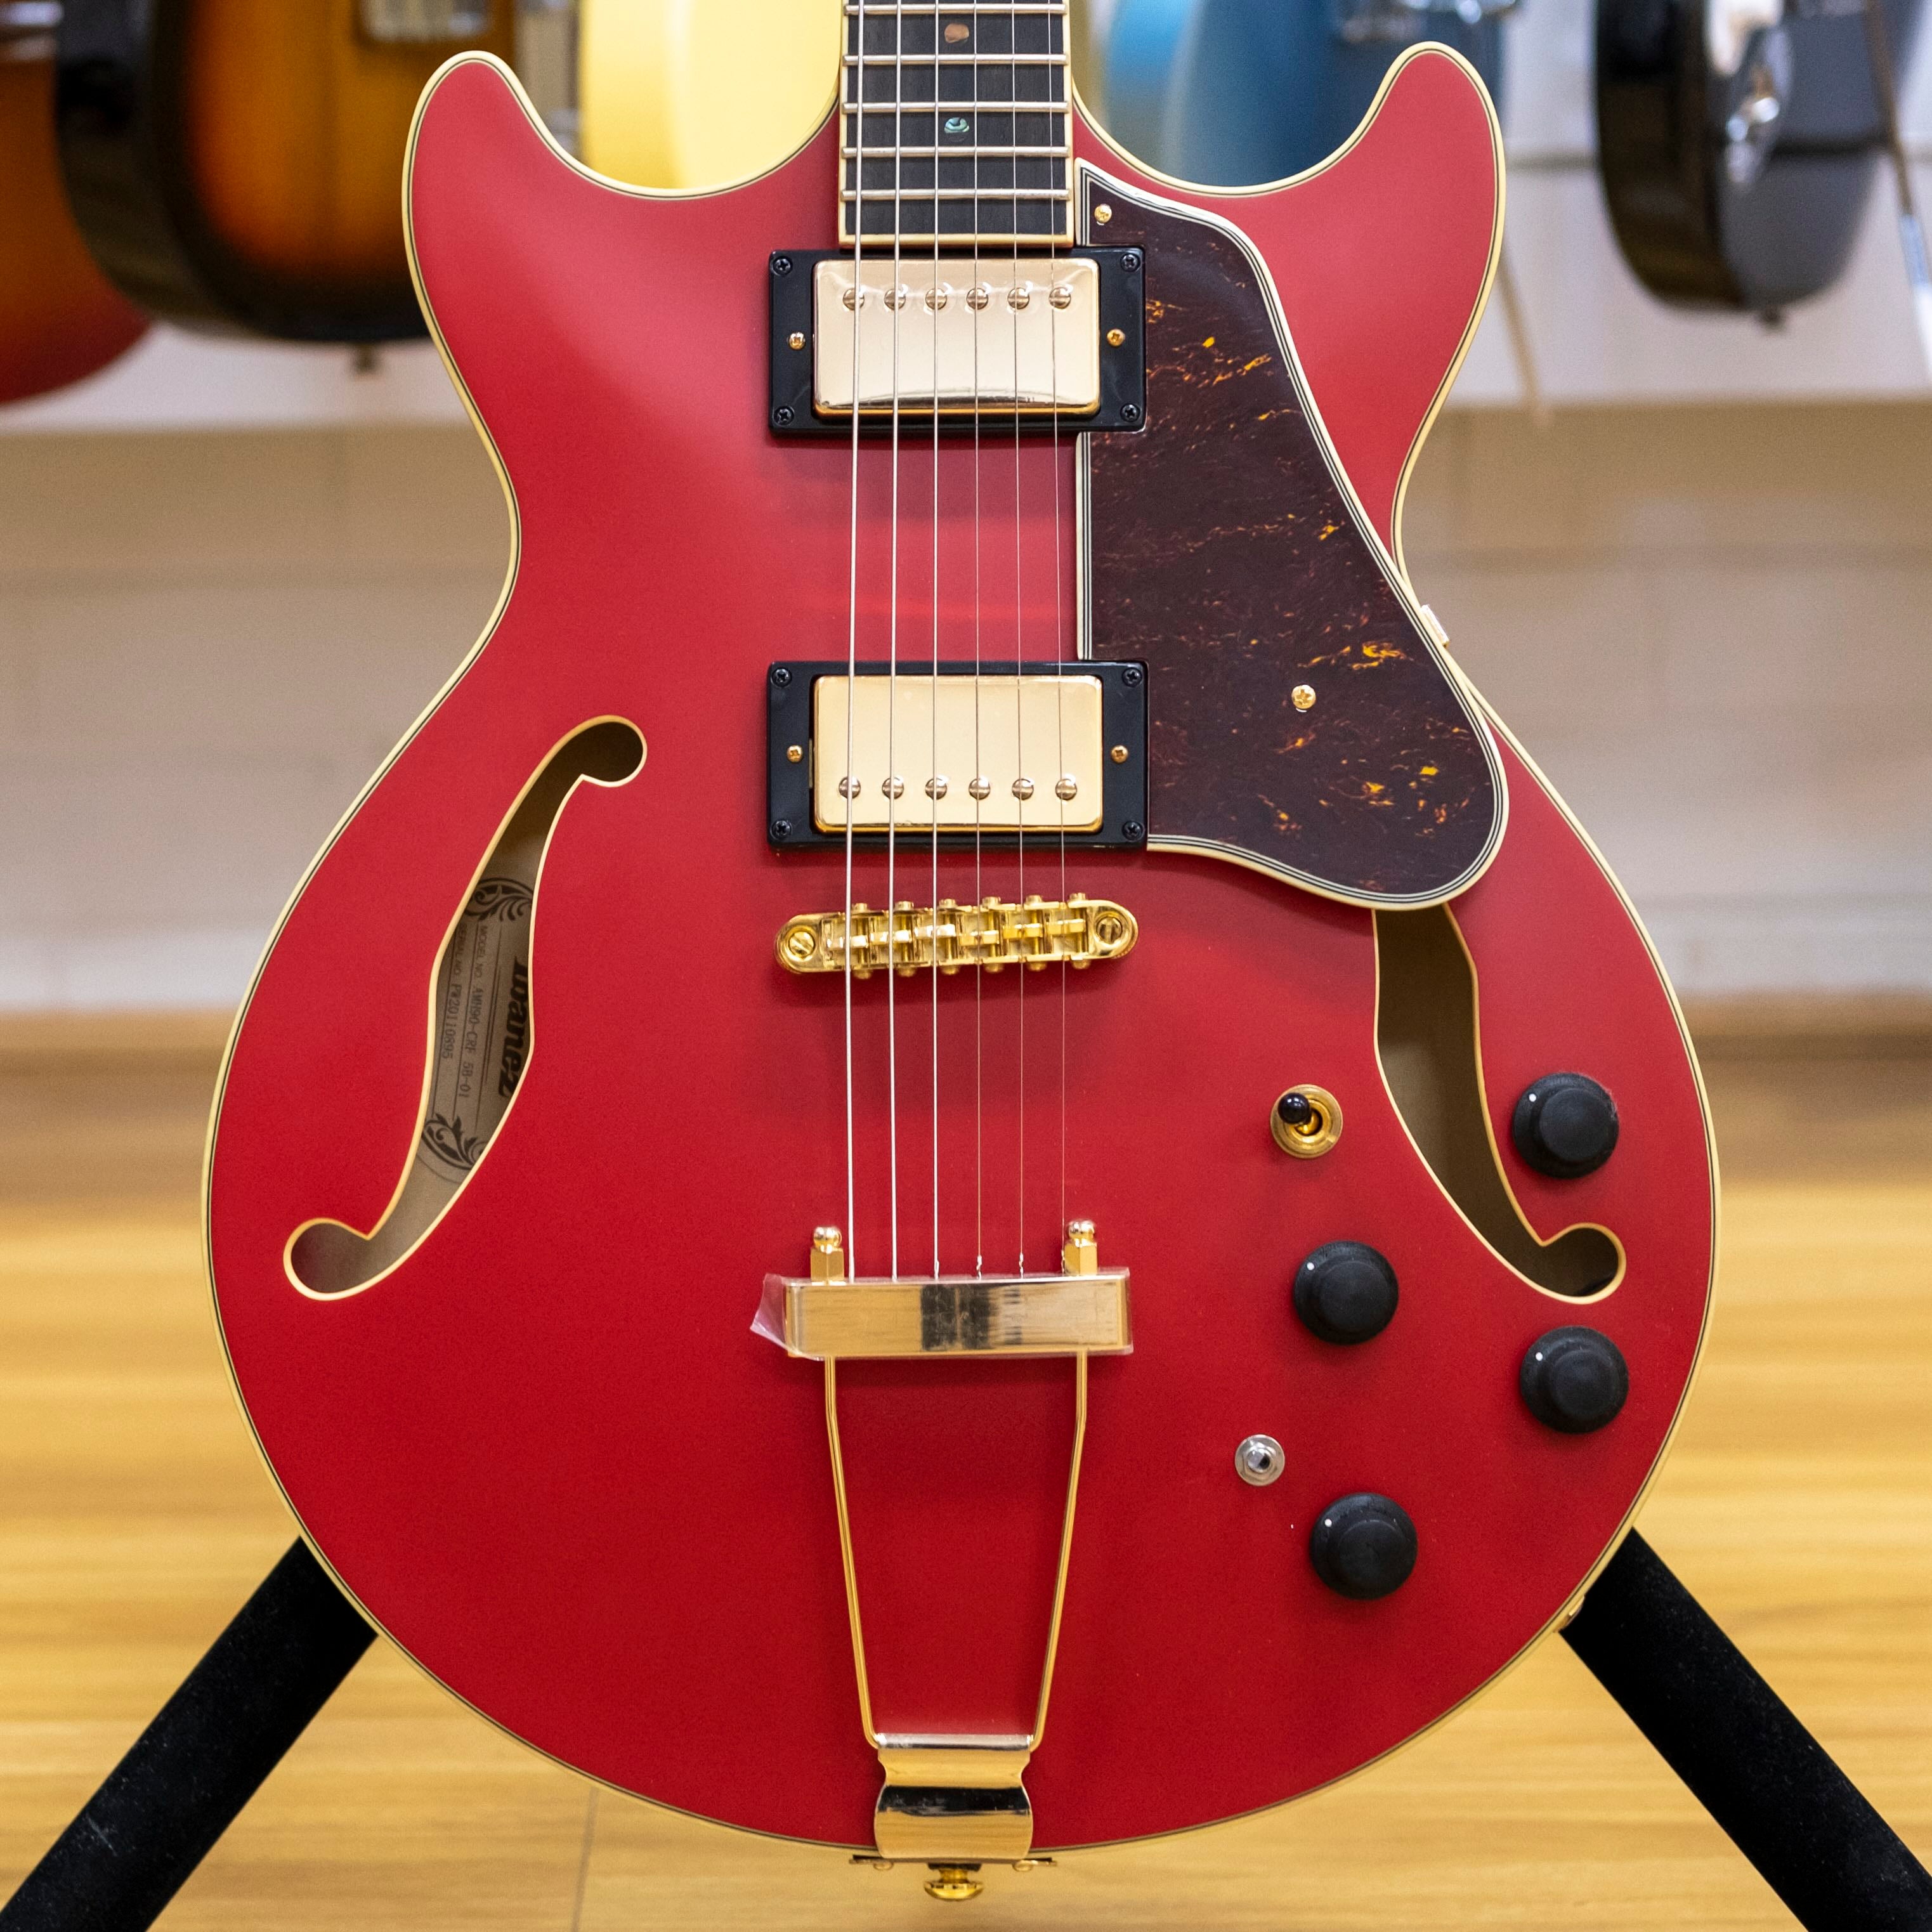 Ibanez AMH90 Artcore Expressionist Semi-Hollow Electric Guitar (Cherry Red Flat)